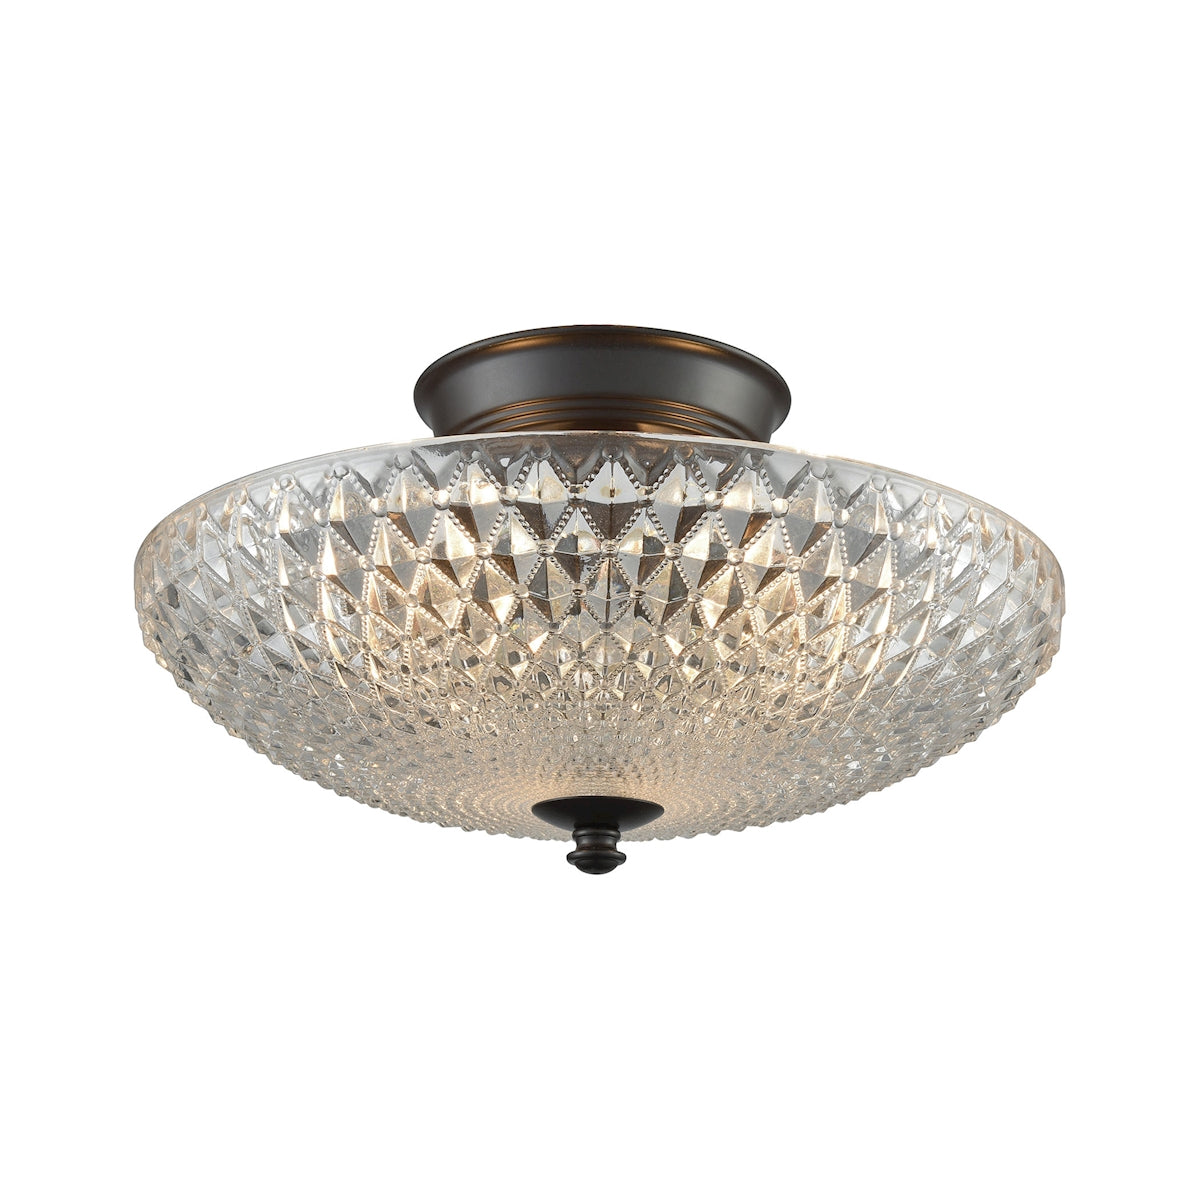 ELK Lighting 16042/3 Sweetwater 3-Light Semi Flush in Oil Rubbed Bronze with Clear Crystal Glass